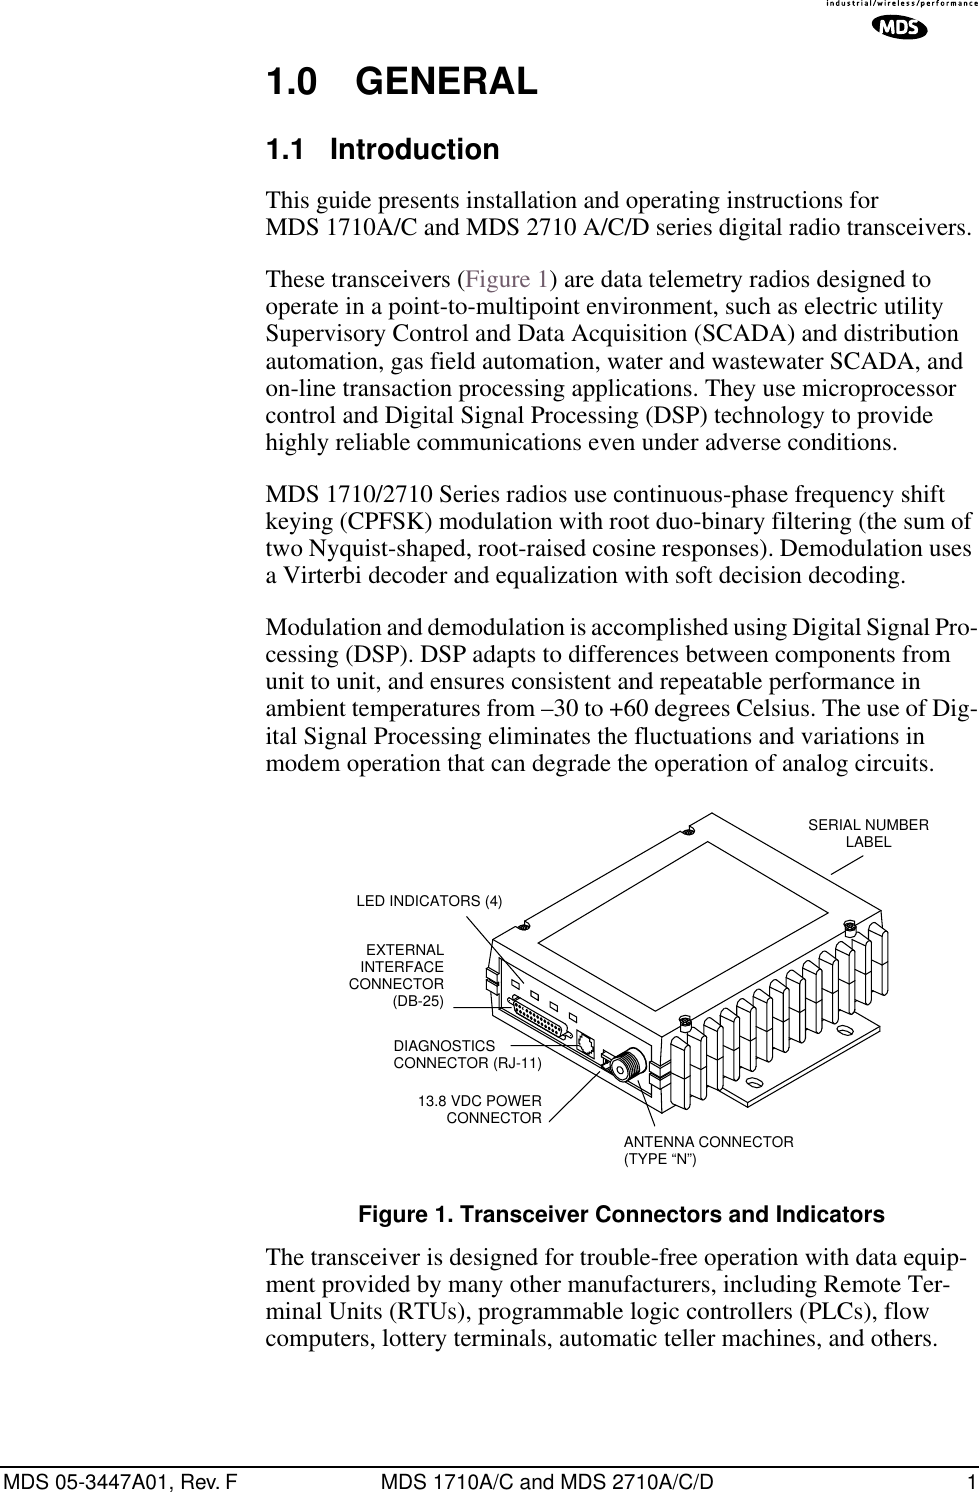  MDS 05-3447A01, Rev. F MDS 1710A/C and MDS 2710A/C/D 1 1.0 GENERAL 1.1 Introduction This guide presents installation and operating instructions for MDS 1710A/C and MDS 2710 A/C/D series digital radio transceivers.These transceivers (Figure 1) are data telemetry radios designed to operate in a point-to-multipoint environment, such as electric utility Supervisory Control and Data Acquisition (SCADA) and distribution automation, gas field automation, water and wastewater SCADA, and on-line transaction processing applications. They use microprocessor control and Digital Signal Processing (DSP) technology to provide highly reliable communications even under adverse conditions.MDS 1710/2710 Series radios use continuous-phase frequency shift keying (CPFSK) modulation with root duo-binary filtering (the sum of two Nyquist-shaped, root-raised cosine responses). Demodulation uses a Virterbi decoder and equalization with soft decision decoding.Modulation and demodulation is accomplished using Digital Signal Pro-cessing (DSP). DSP adapts to differences between components from unit to unit, and ensures consistent and repeatable performance in ambient temperatures from –30 to +60 degrees Celsius. The use of Dig-ital Signal Processing eliminates the fluctuations and variations in modem operation that can degrade the operation of analog circuits. Figure 1. Transceiver Connectors and Indicators The transceiver is designed for trouble-free operation with data equip-ment provided by many other manufacturers, including Remote Ter-minal Units (RTUs), programmable logic controllers (PLCs), flow computers, lottery terminals, automatic teller machines, and others.EXTERNAL INTERFACECONNECTOR(DB-25)DIAGNOSTICS CONNECTOR (RJ-11)13.8 VDC POWER CONNECTORANTENNA CONNECTOR(TYPE “N”)SERIAL NUMBERLABELLED INDICATORS (4)